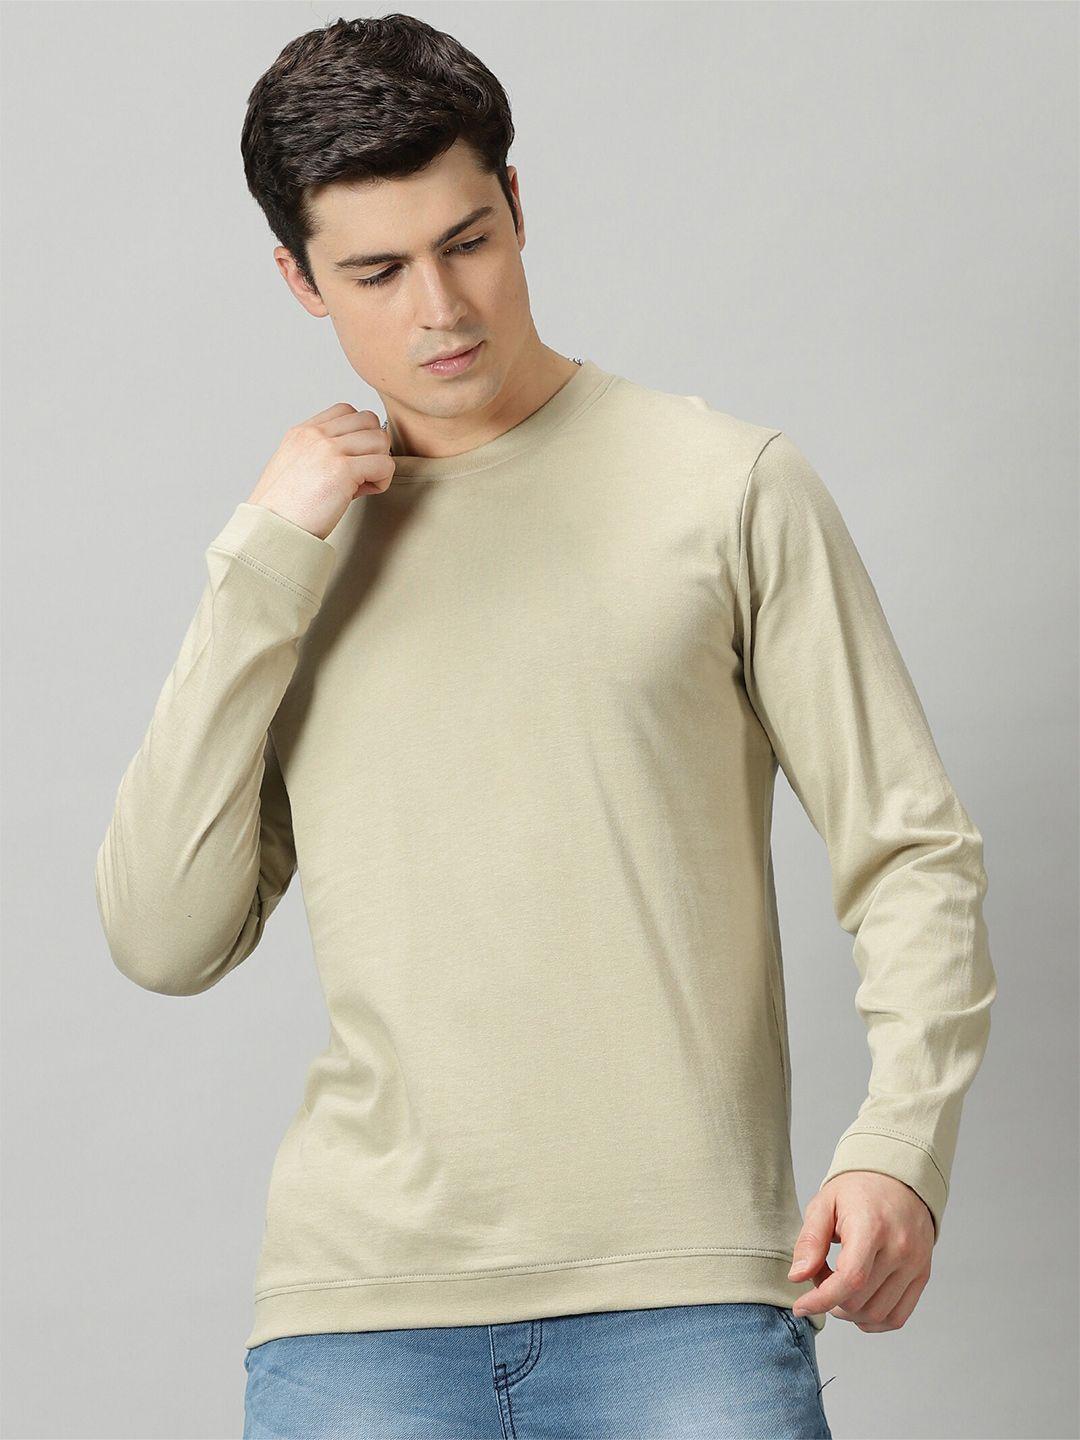 the hollander  round neck long sleeves pure cotton t-shirt